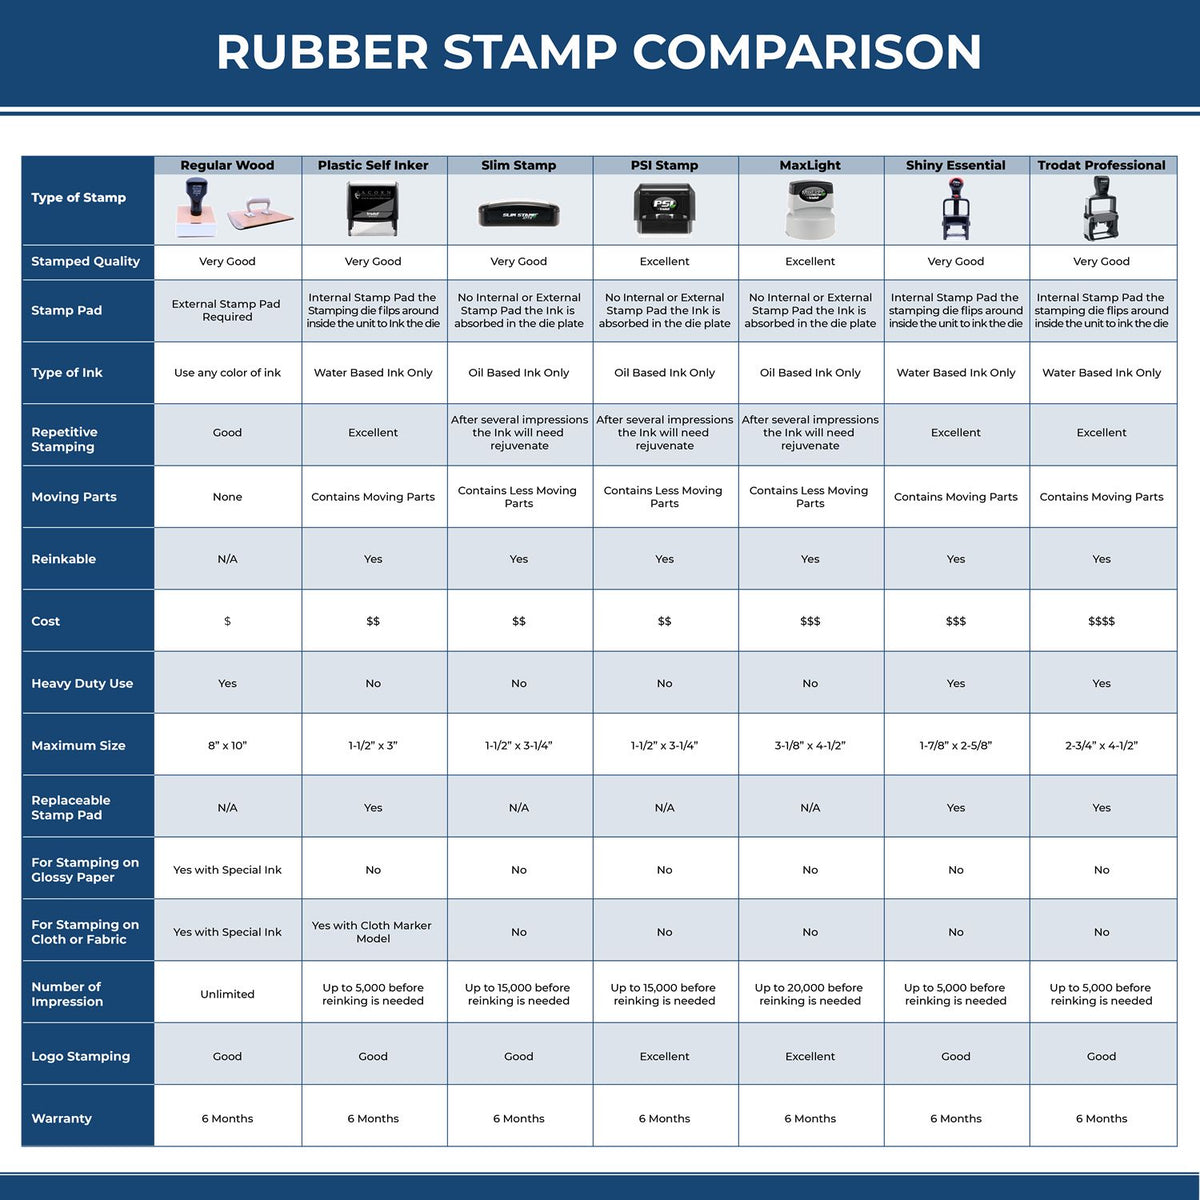 A comparison chart for the different types of mount models available for the Heavy-Duty Arkansas Rectangular Notary Stamp.